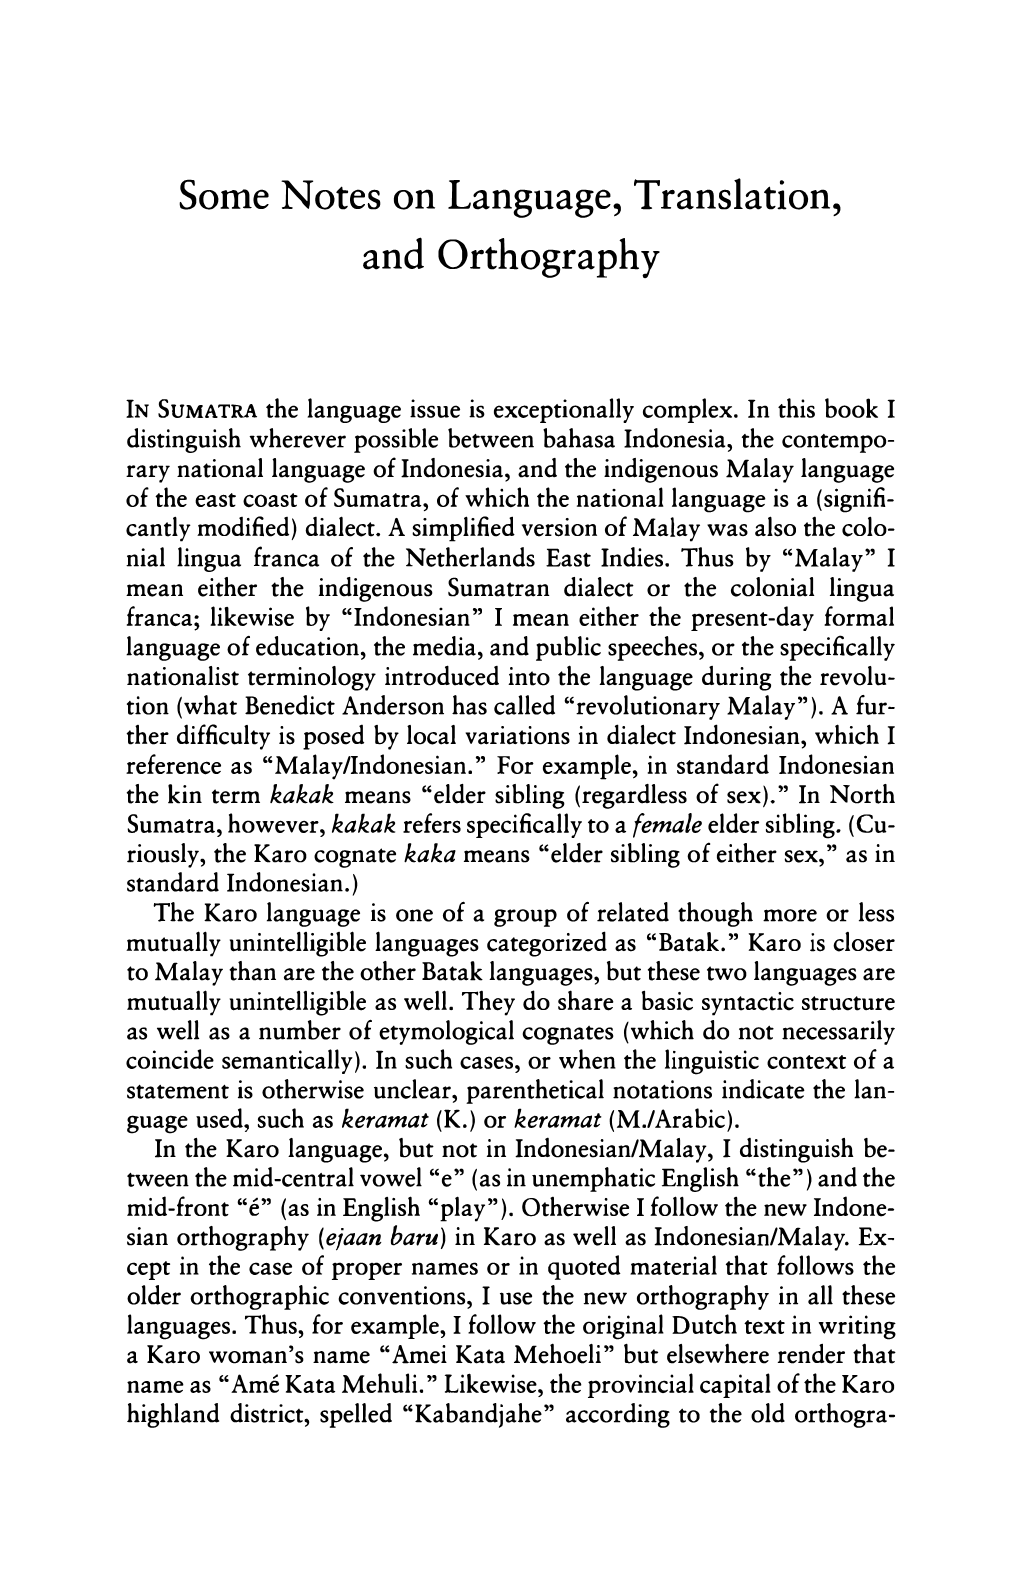 Some Notes on Language, Translation, and Orthography